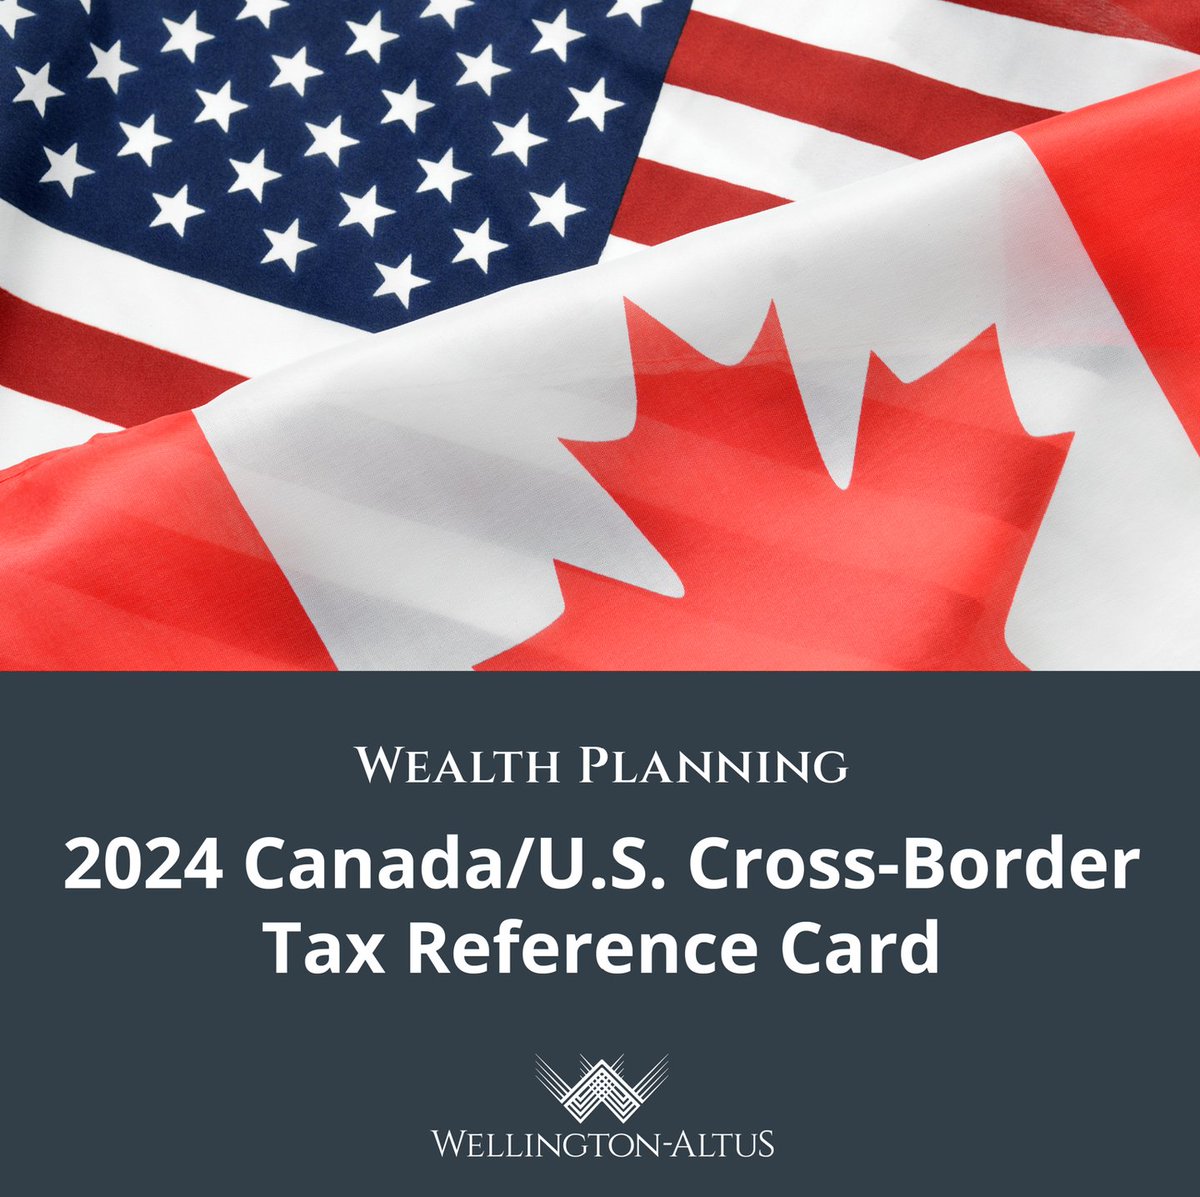 U.S. persons living in Canada and/or those who own U.S. situs assets may have tax and information filing obligations in the U.S. See filing requirements and details around certain relief measures here: rb.gy/g0tpvz #WealthPlanning #CanadaUSCrossBorderTaxes